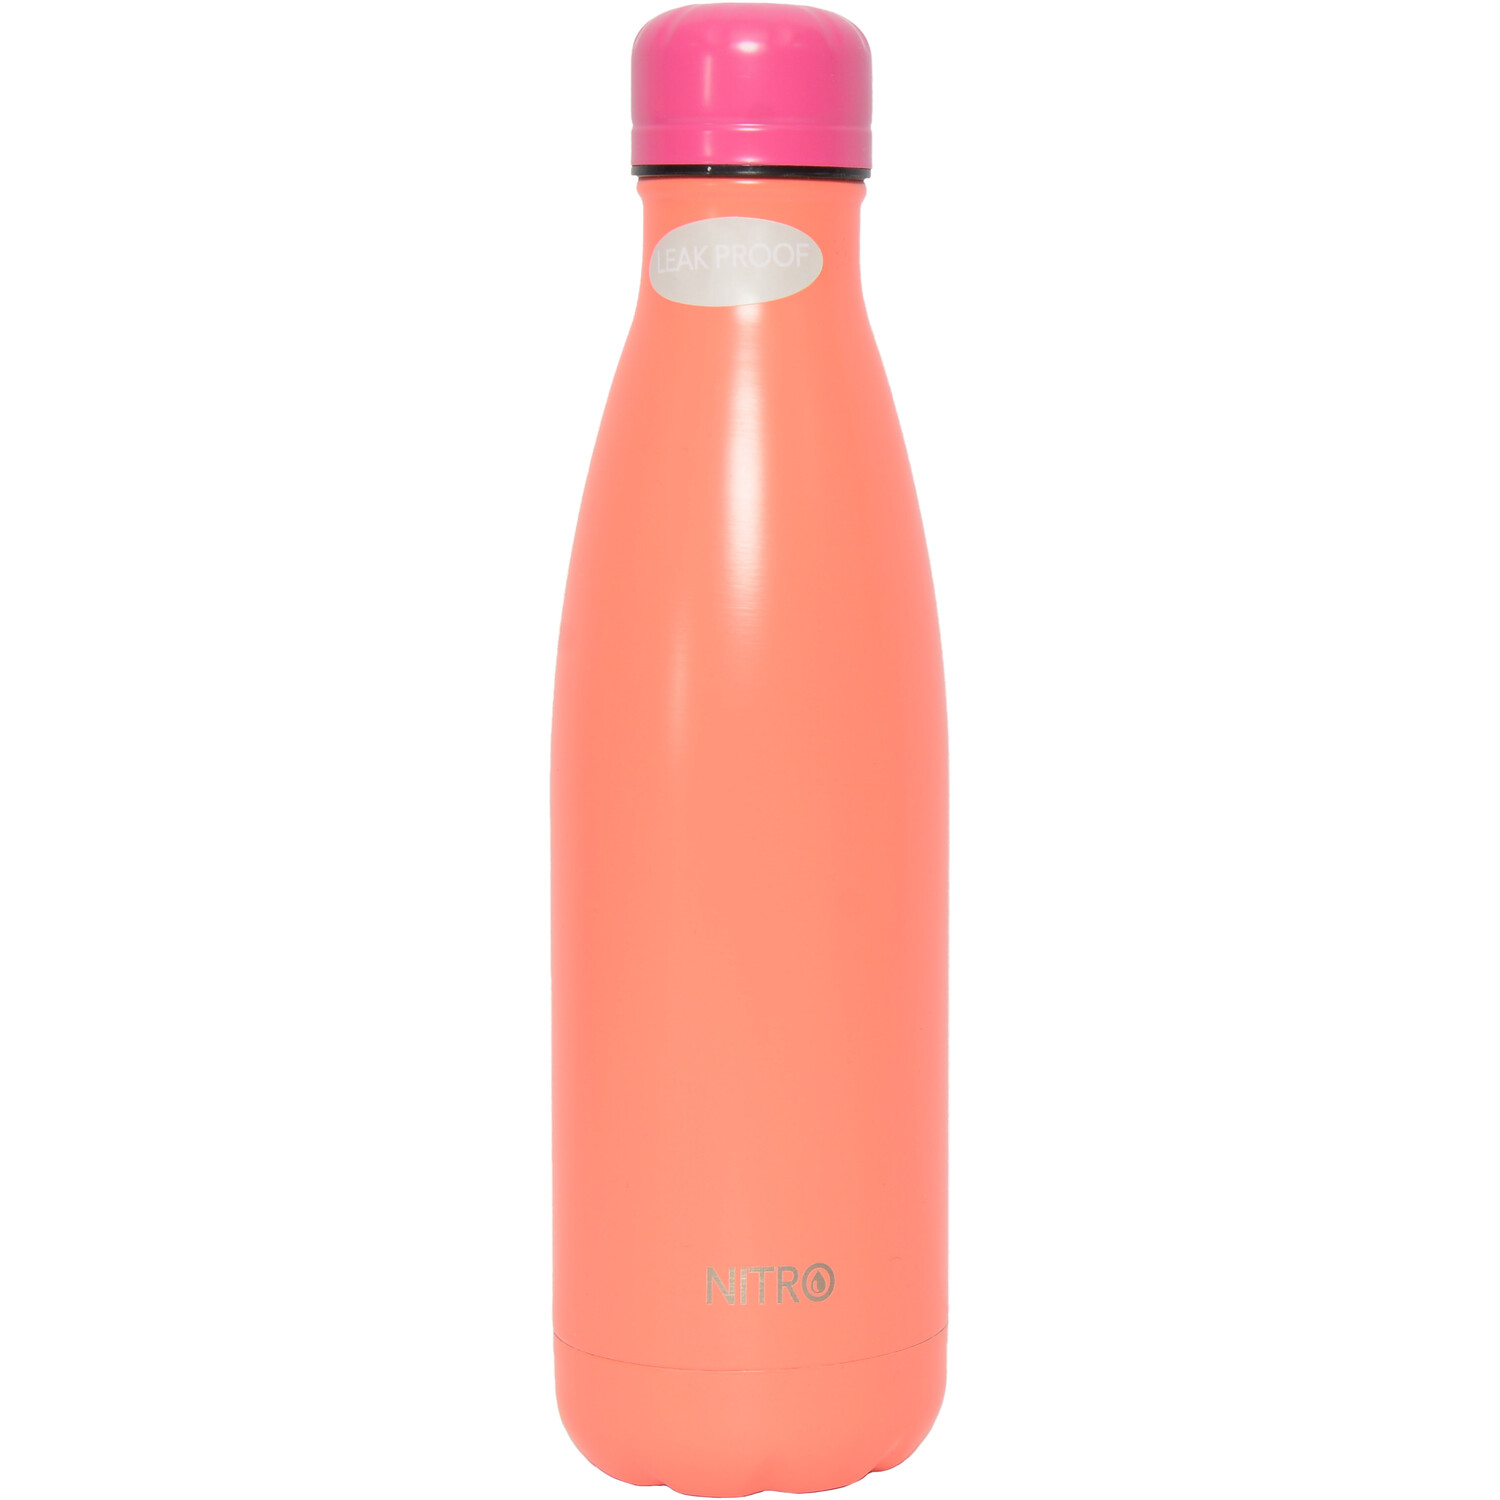 Nitro Neon Pink/Coral Stainless Steel Bottle Image 3